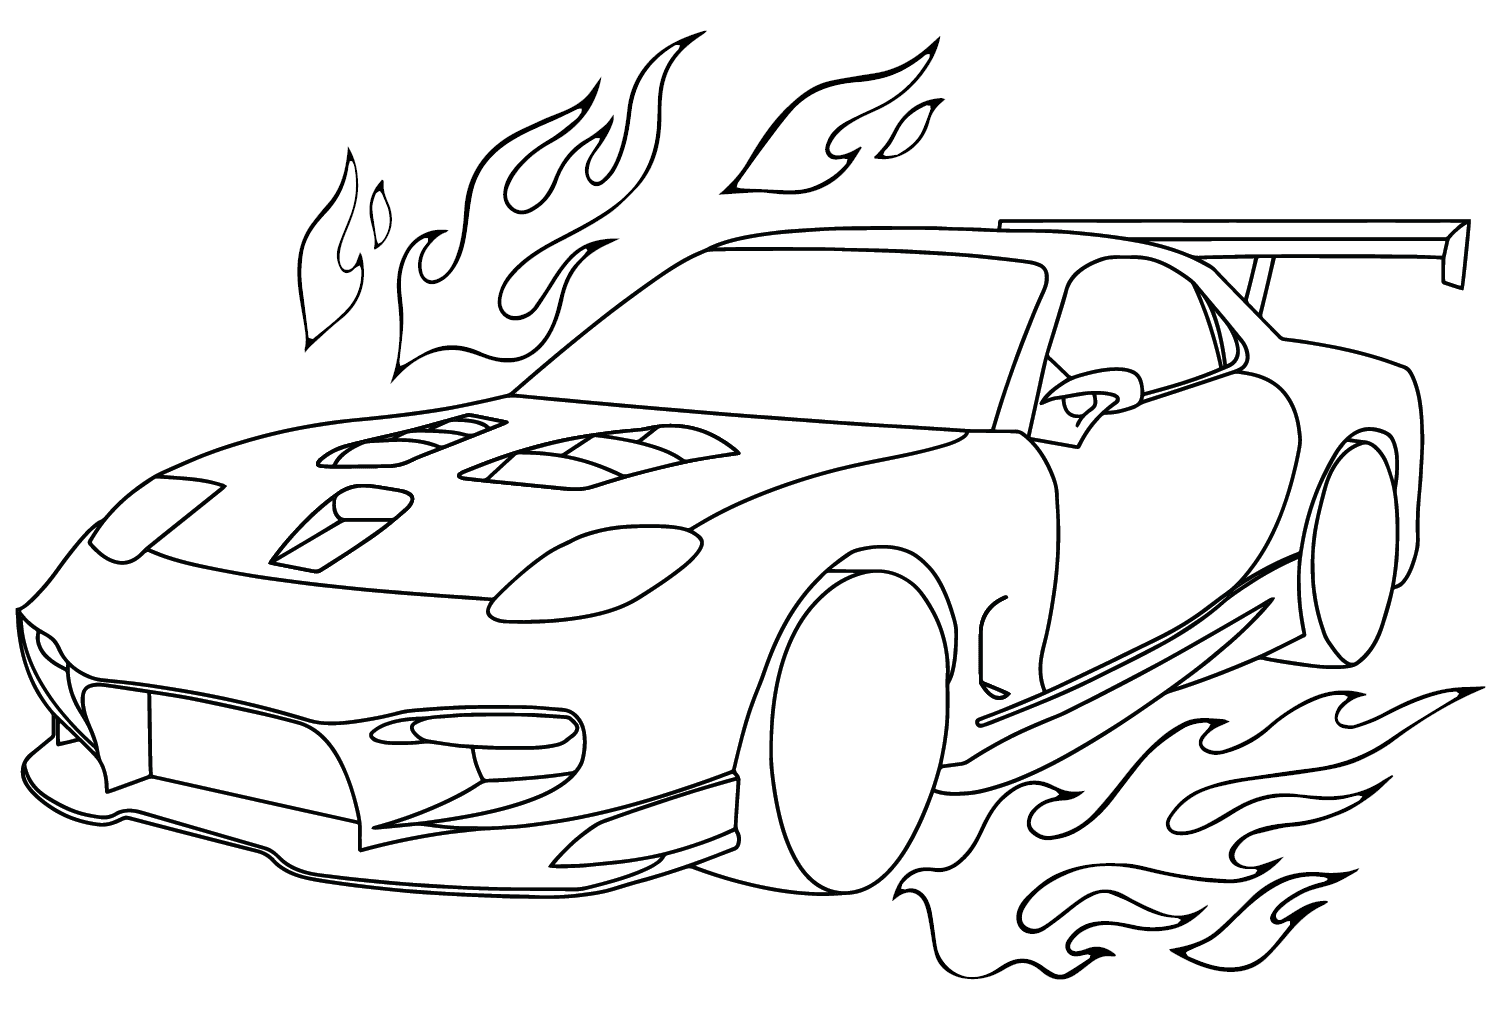 Mazda RX-7 Sport Coloring Page from Mazda